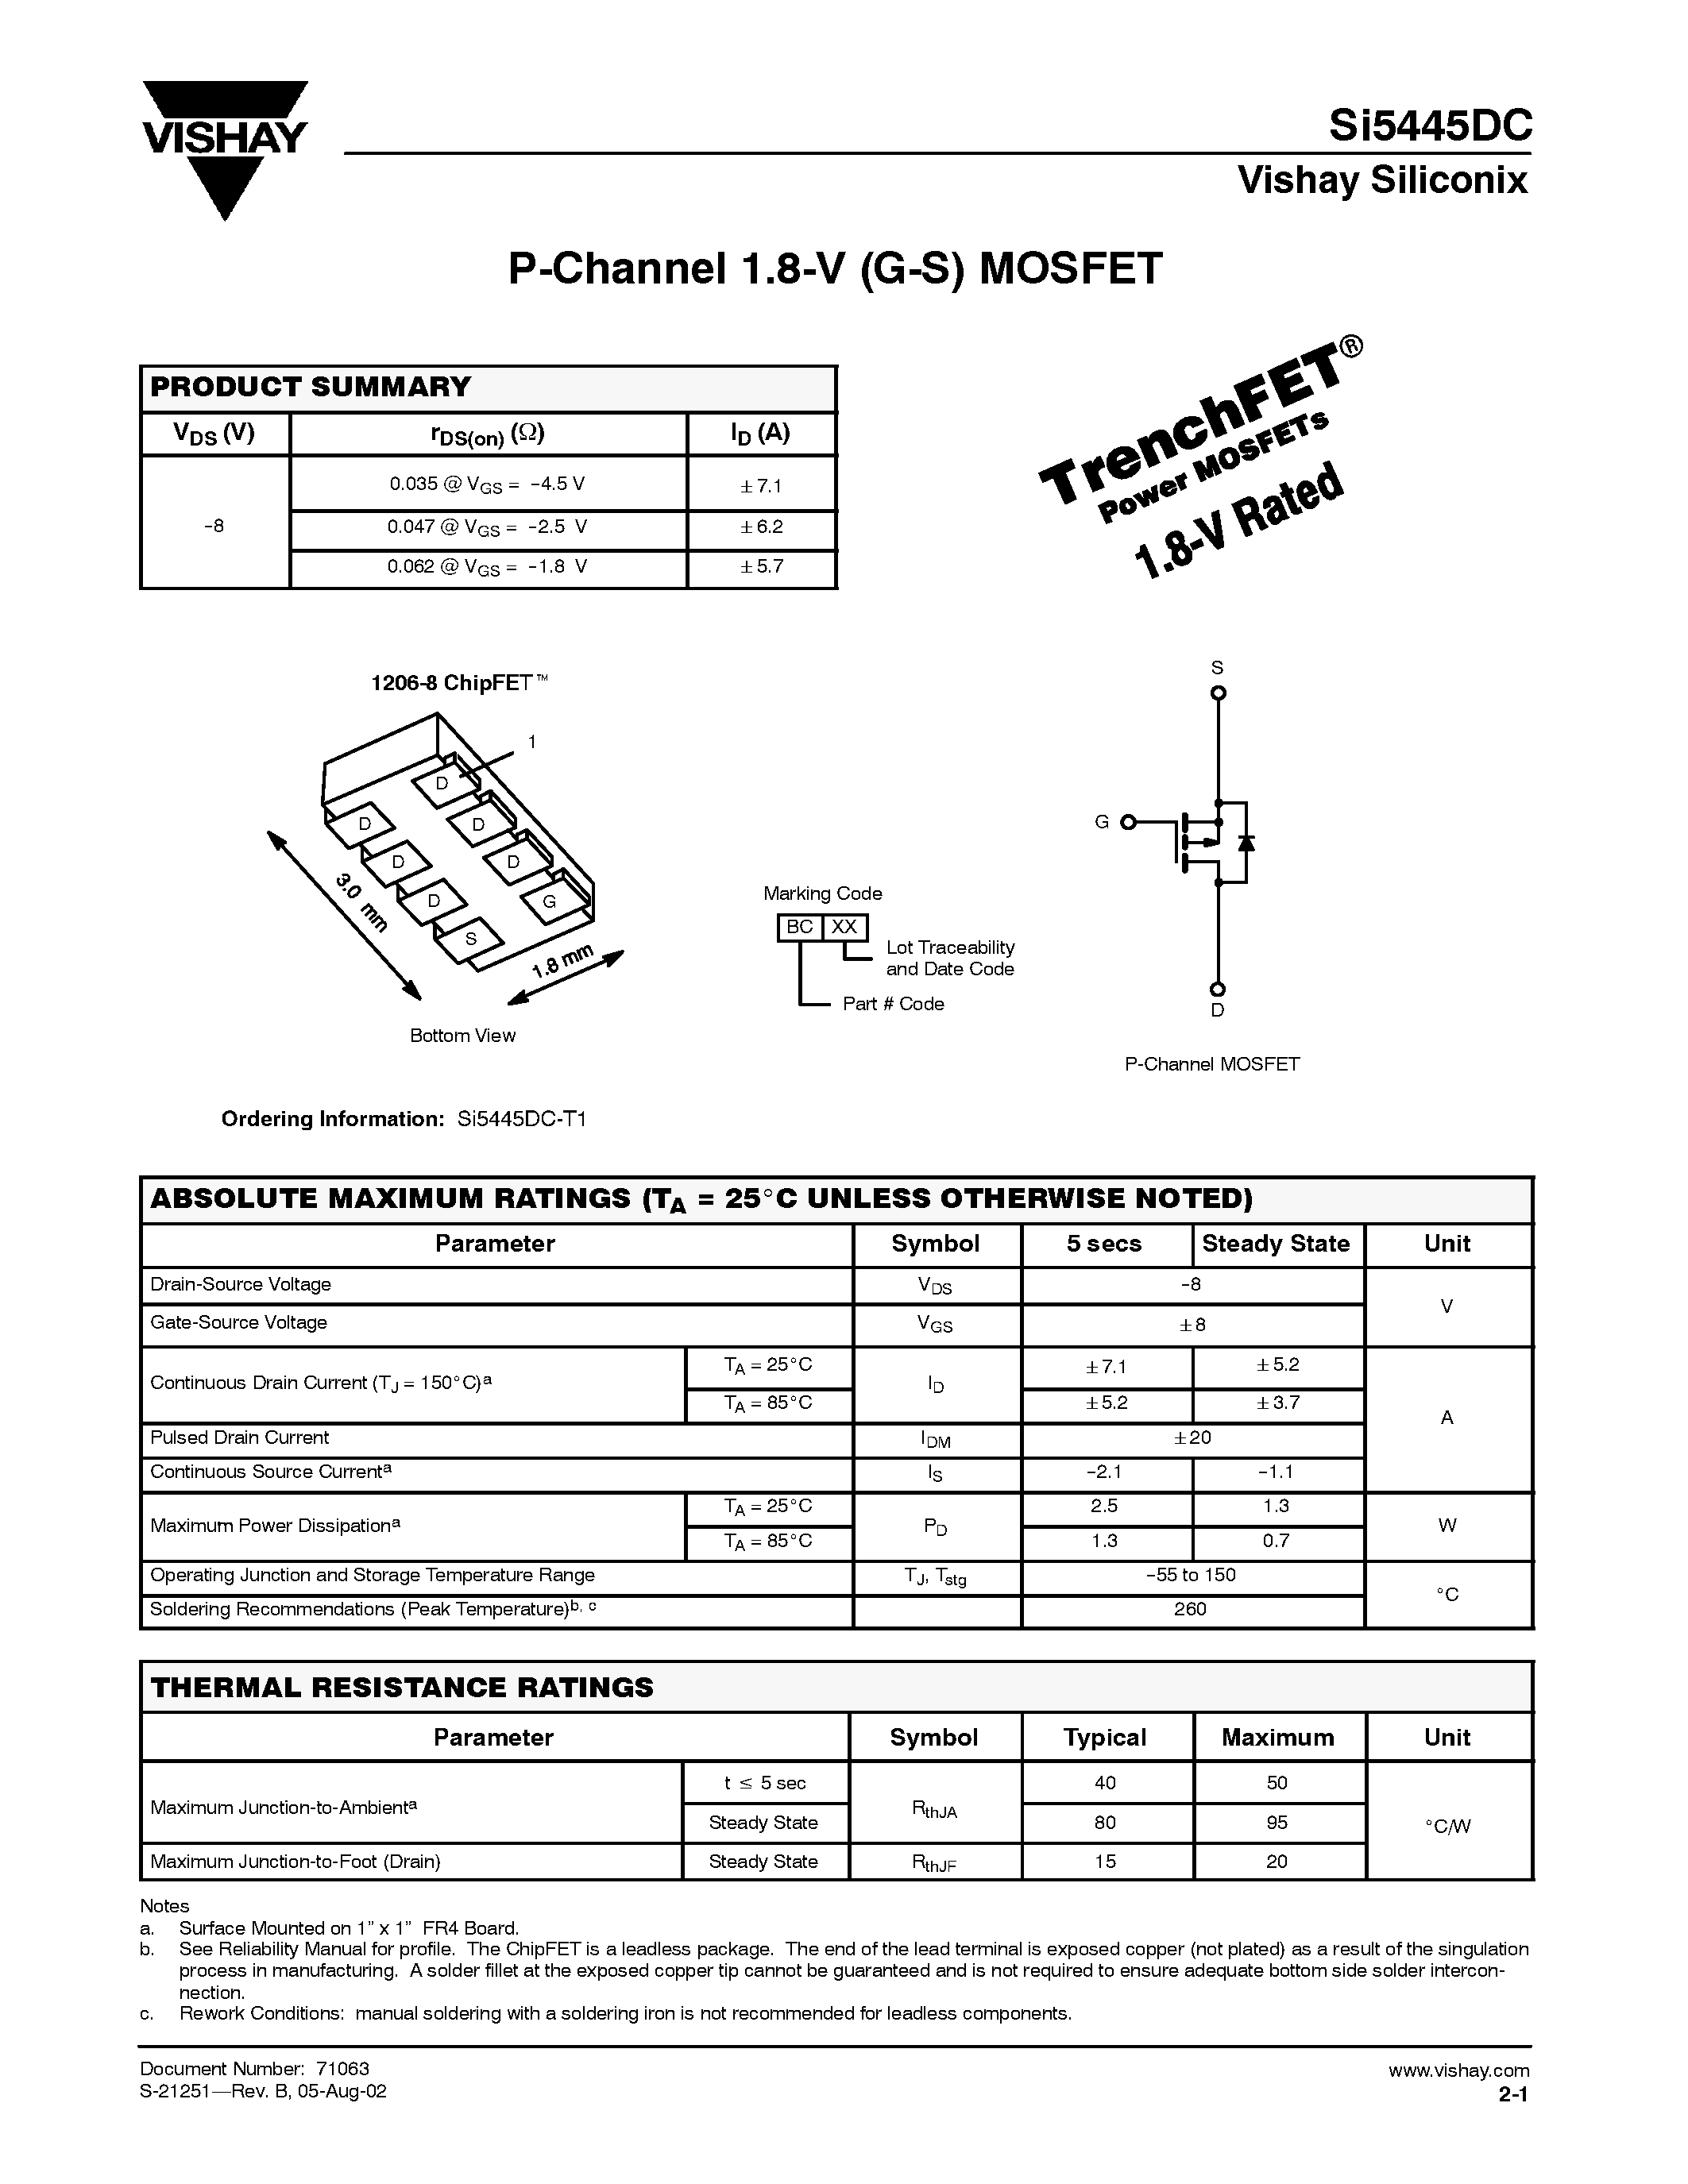 Datasheet SI5445DC - P-Channel 1.8-V (G-S) MOSFET page 1